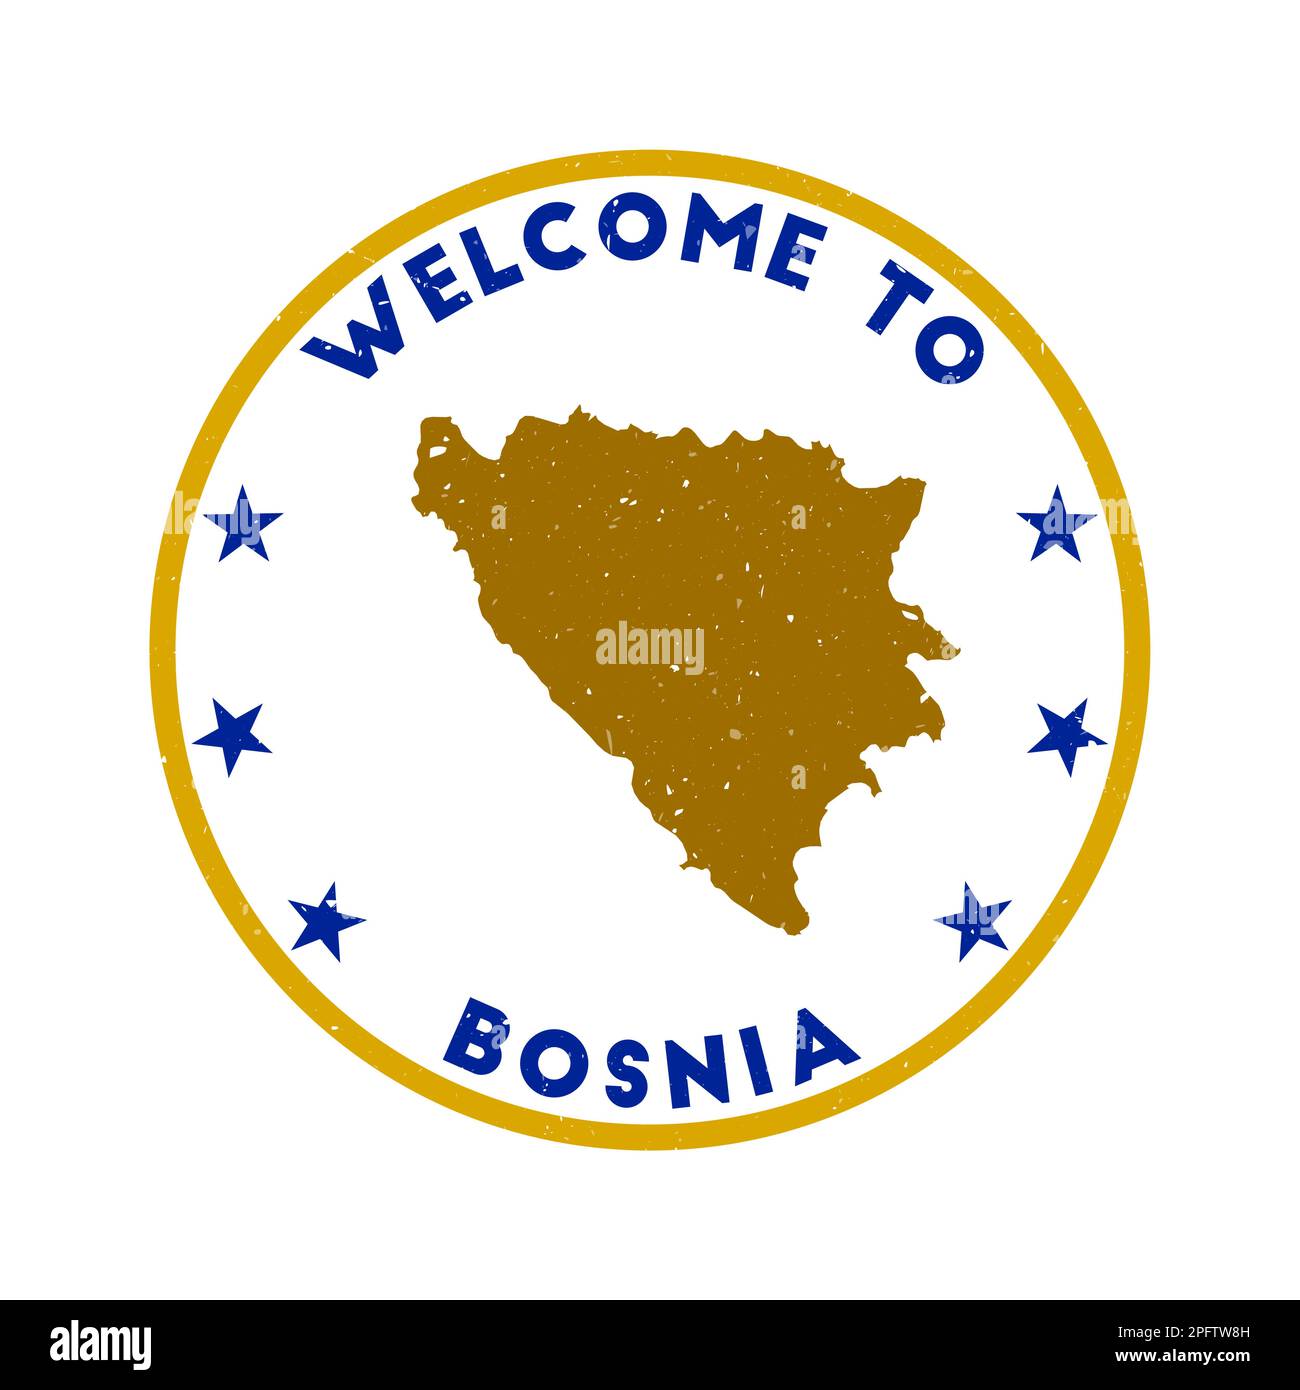 Welcome to Bosnia stamp. Grunge country round stamp with texture in Space Dust color theme. Vintage style geometric Bosnia seal. Radiant vector illust Stock Vector